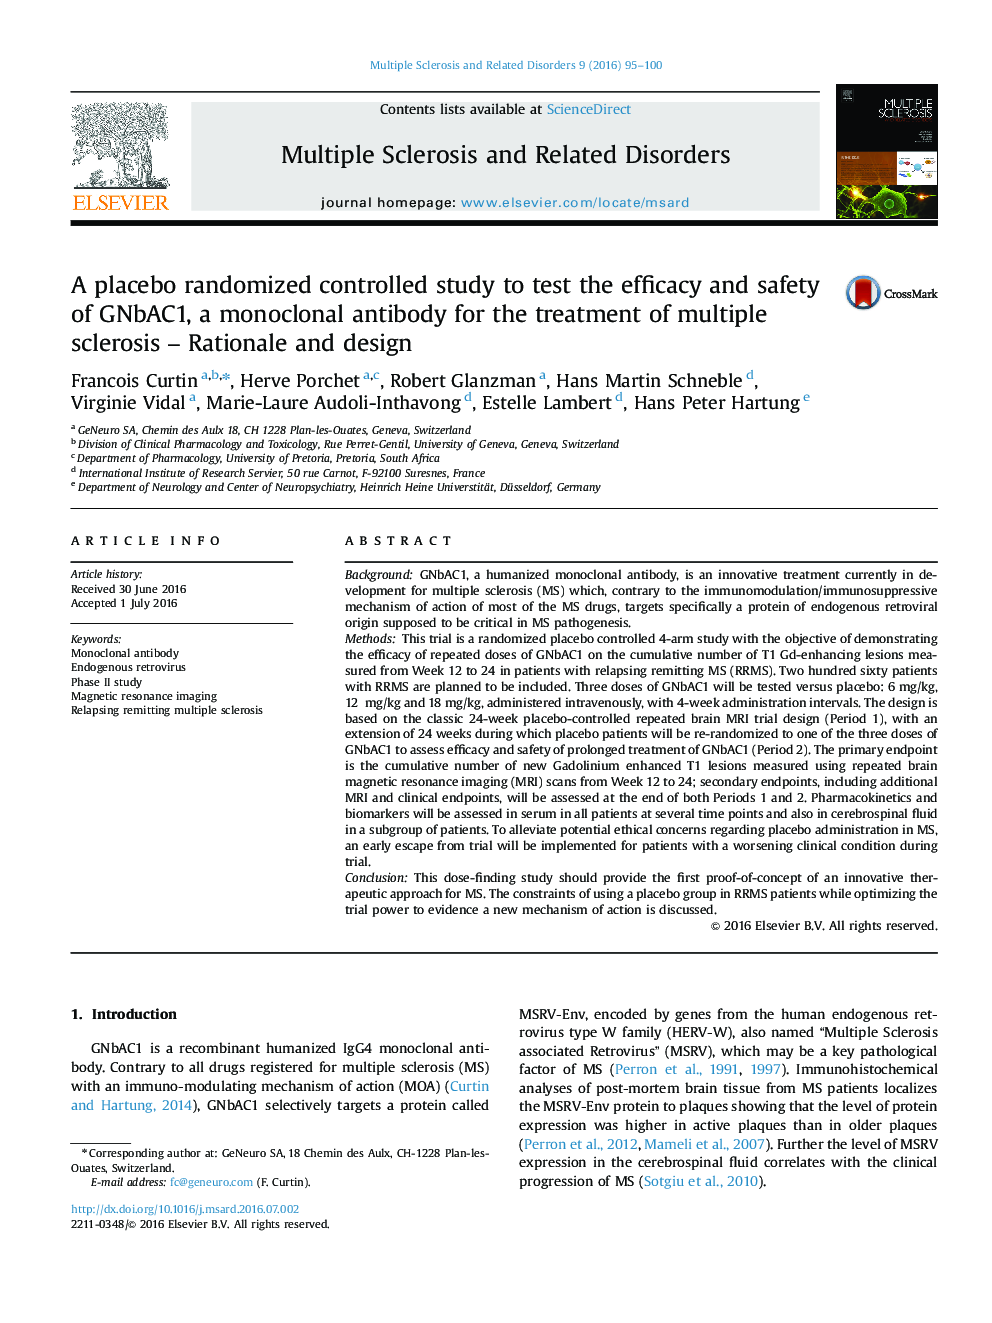 A placebo randomized controlled study to test the efficacy and safety of GNbAC1, a monoclonal antibody for the treatment of multiple sclerosis - Rationale and design